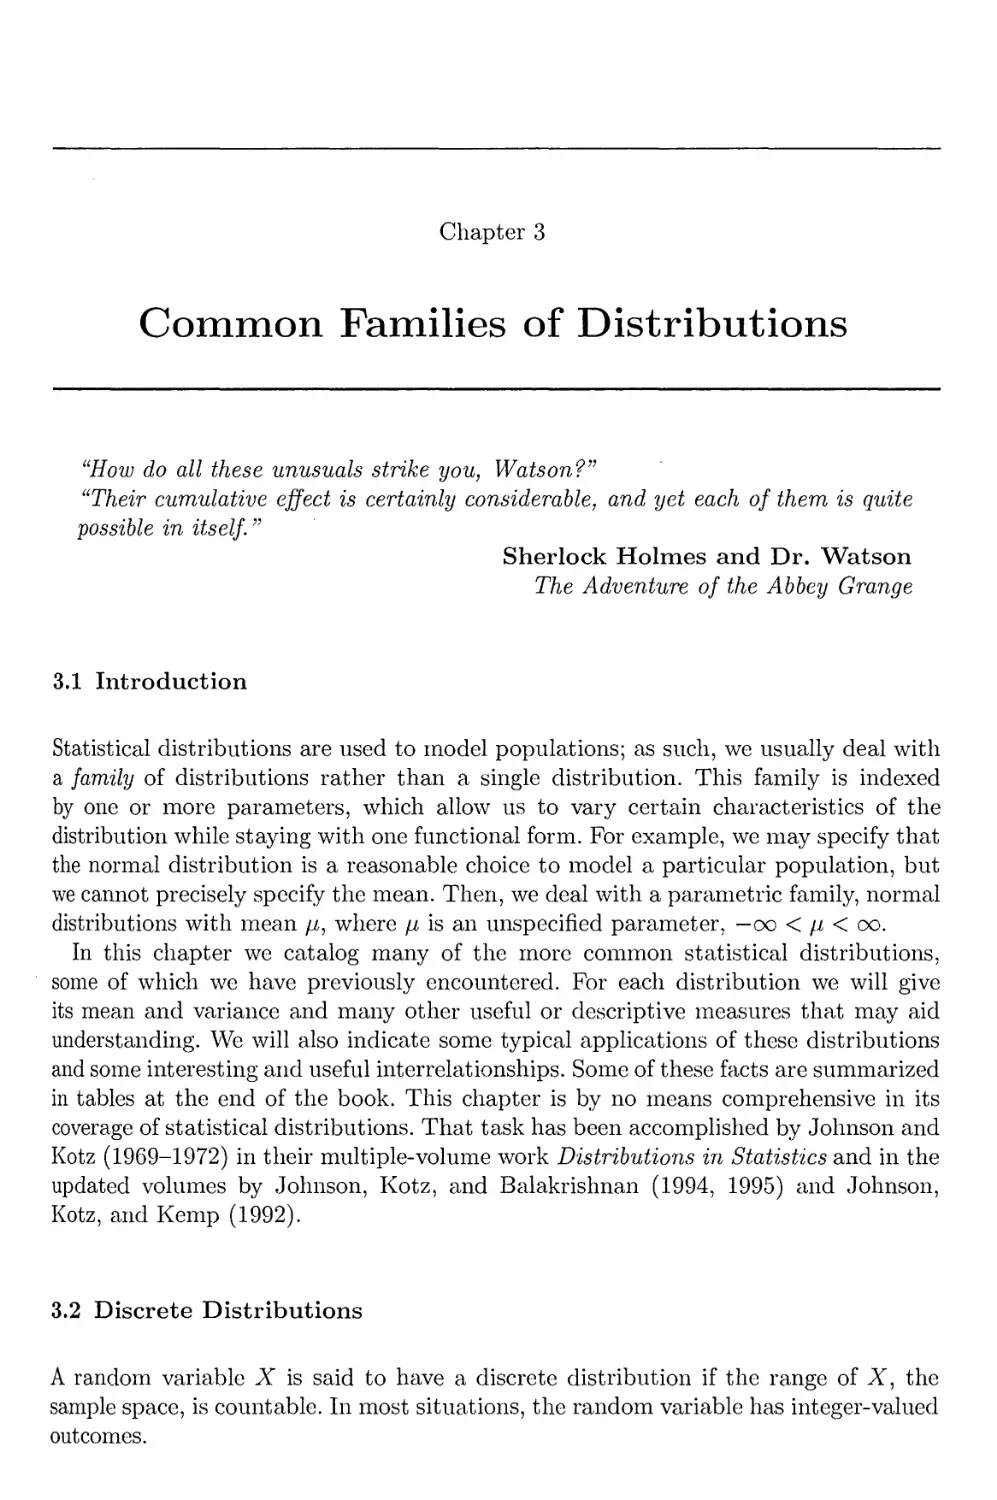 3. Common Families of Distributions